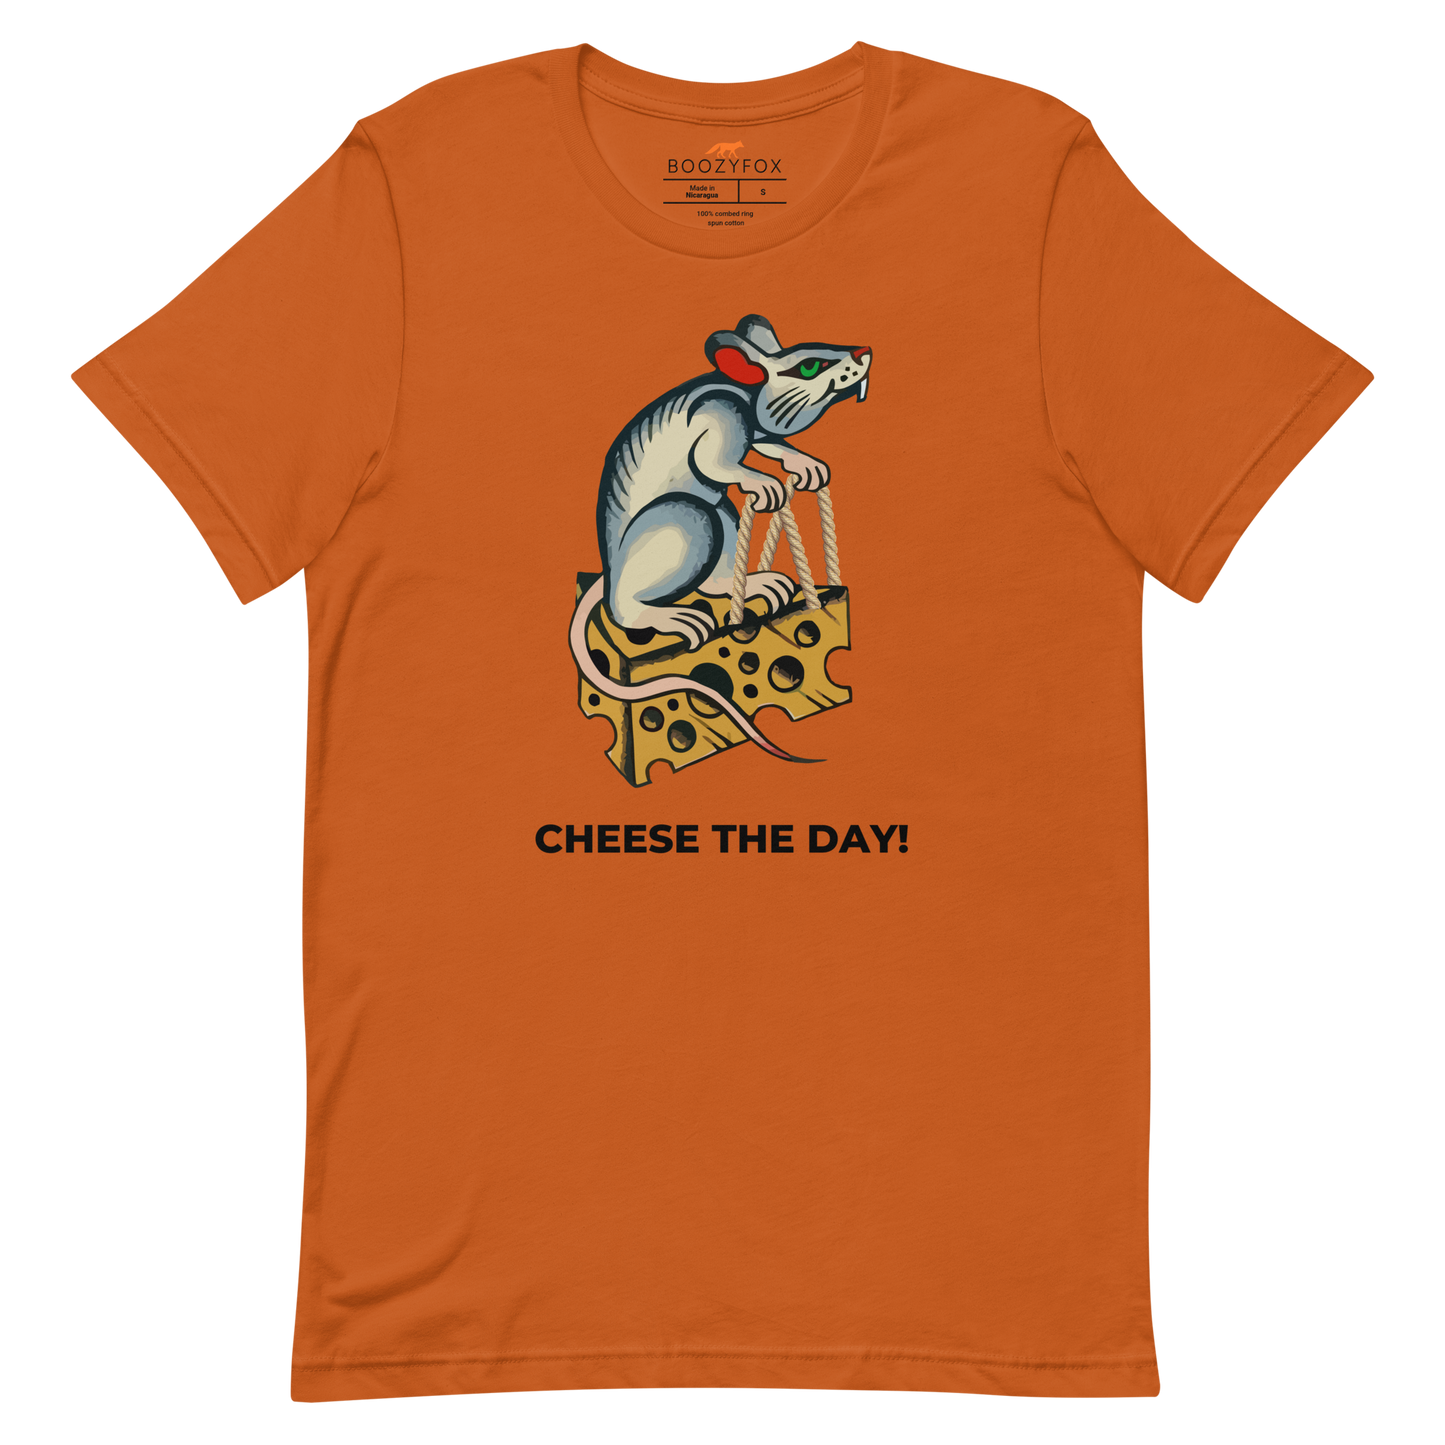 Autumn Colored Premium Rat T-Shirt featuring a hilarious Cheese The Day graphic on the chest - Funny Graphic Rat Tees - Boozy Fox